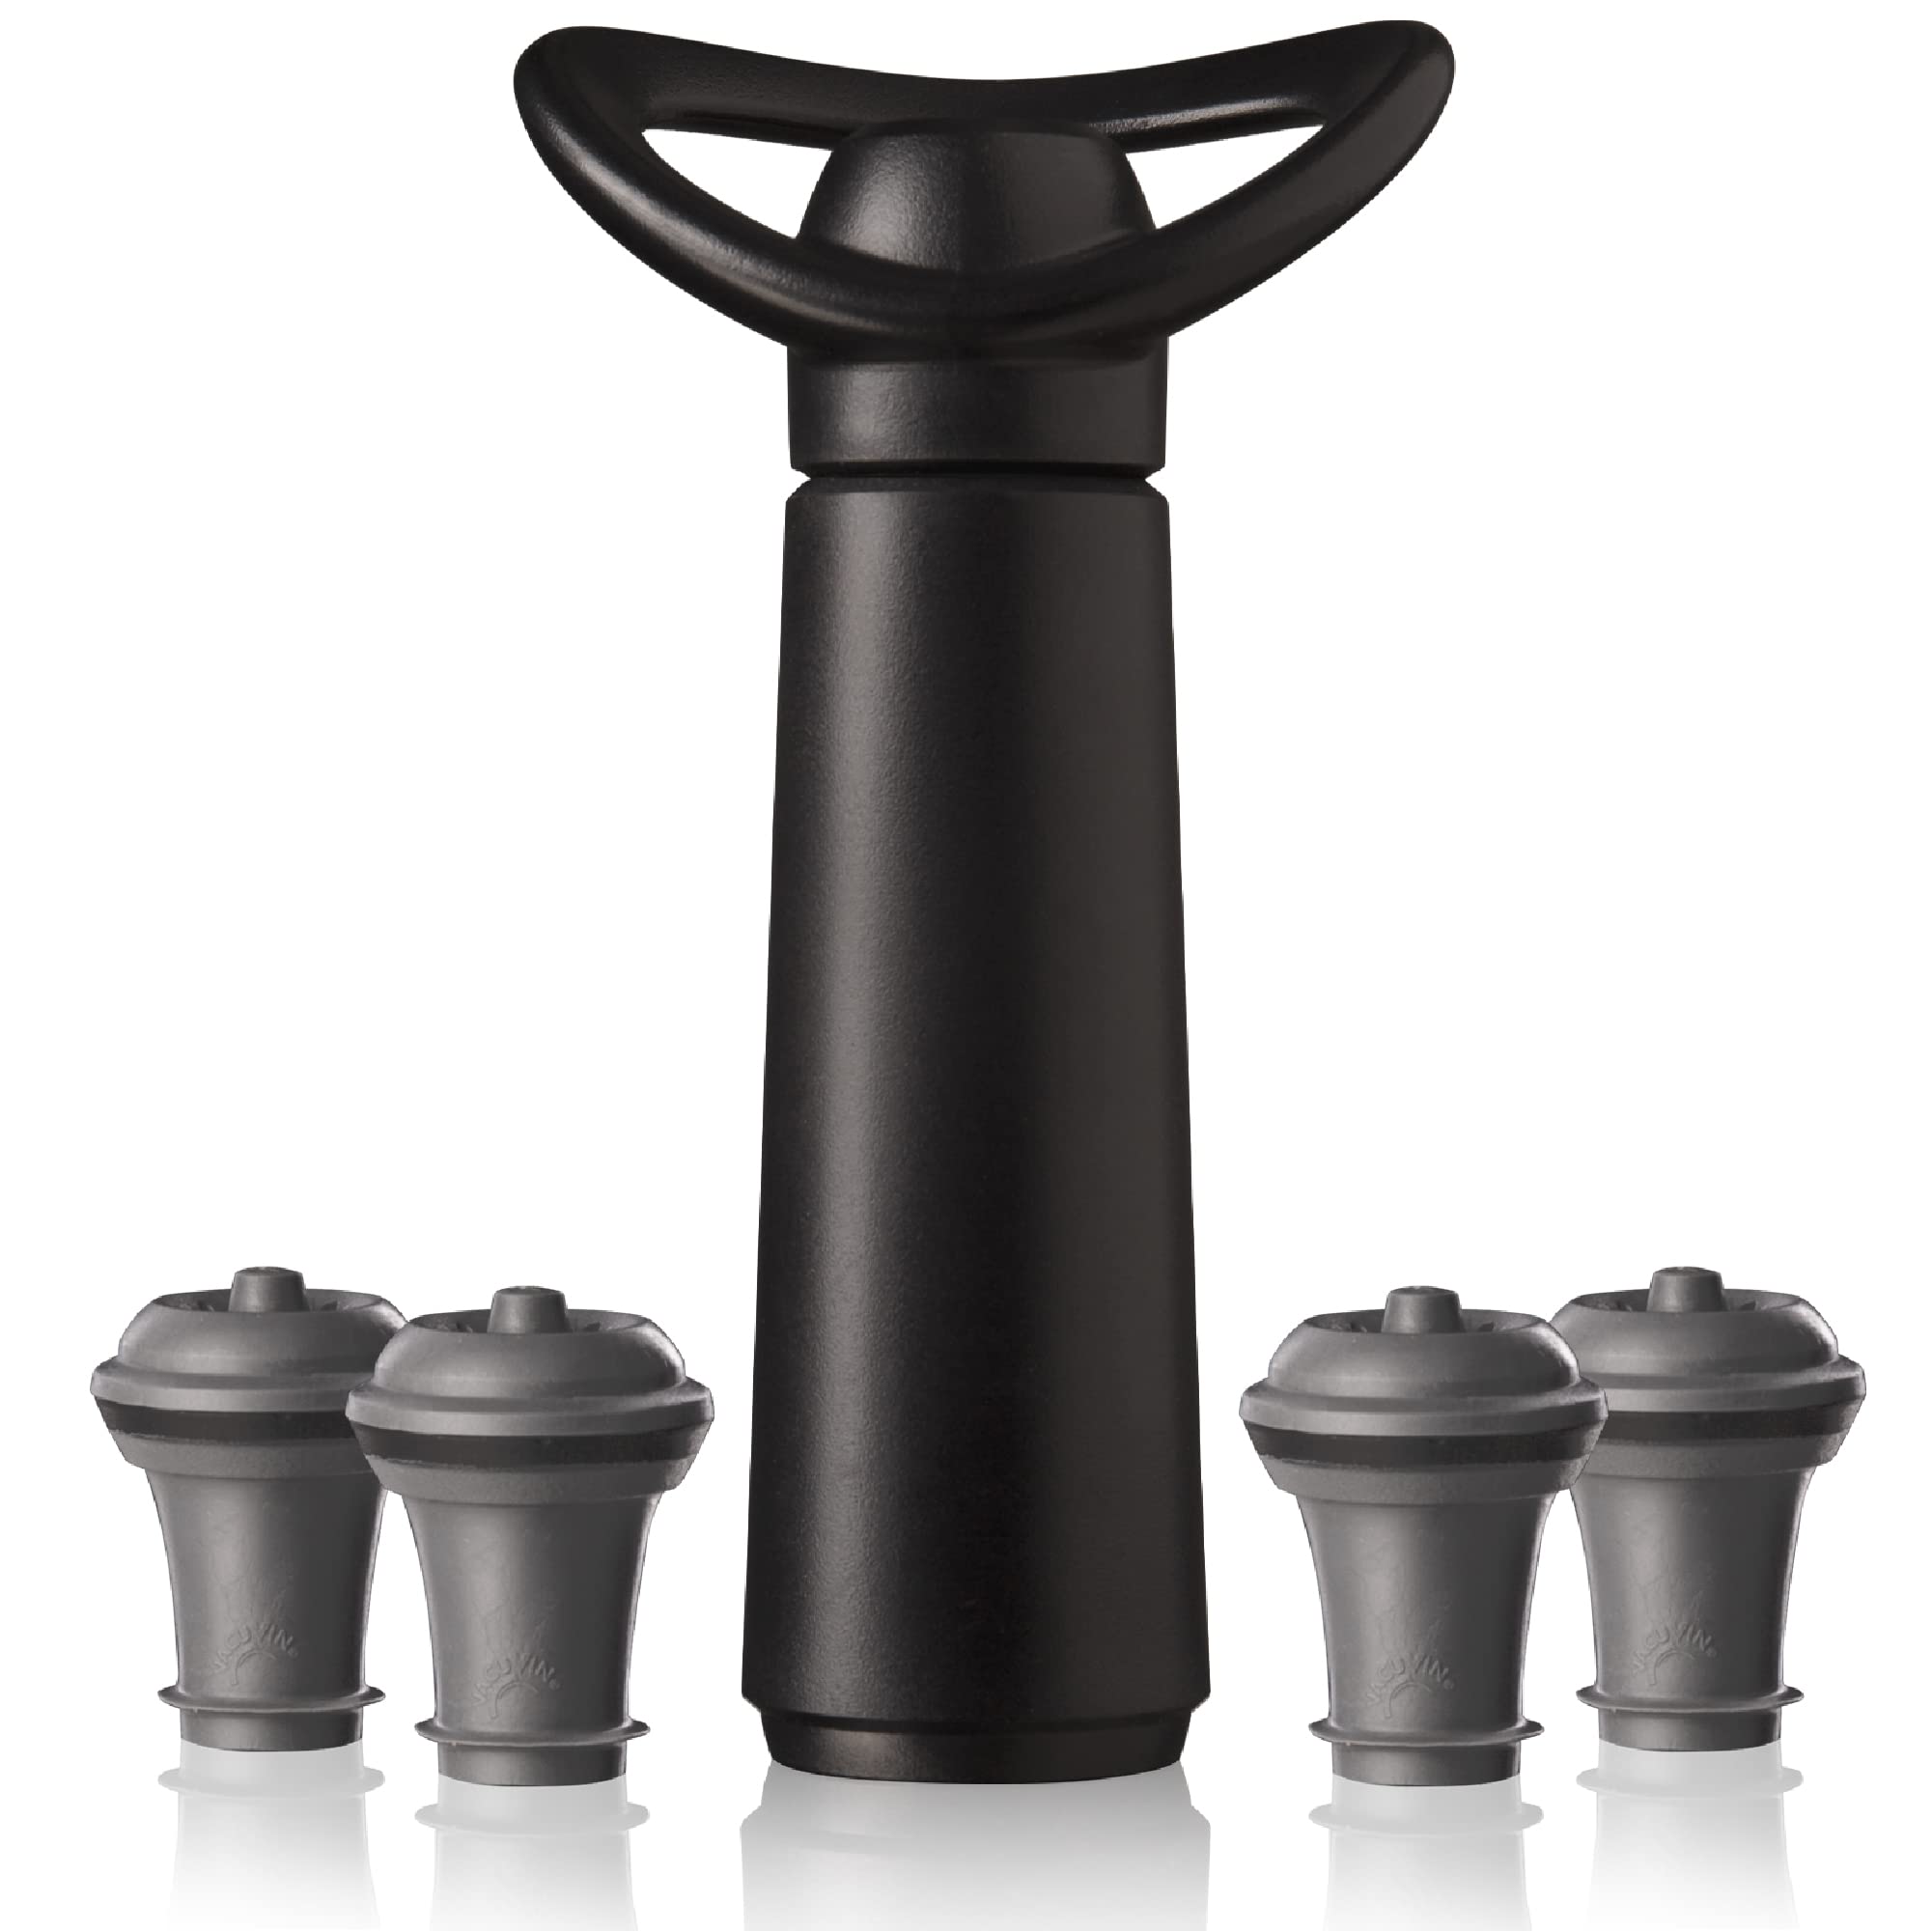 Vacu Vin Wine Saver Concerto - Black - 1 Pump 4 Stoppers - Wine Stoppers for Bottles with Vacuum Pump and Pourer - Reusable - Made in the Netherlands